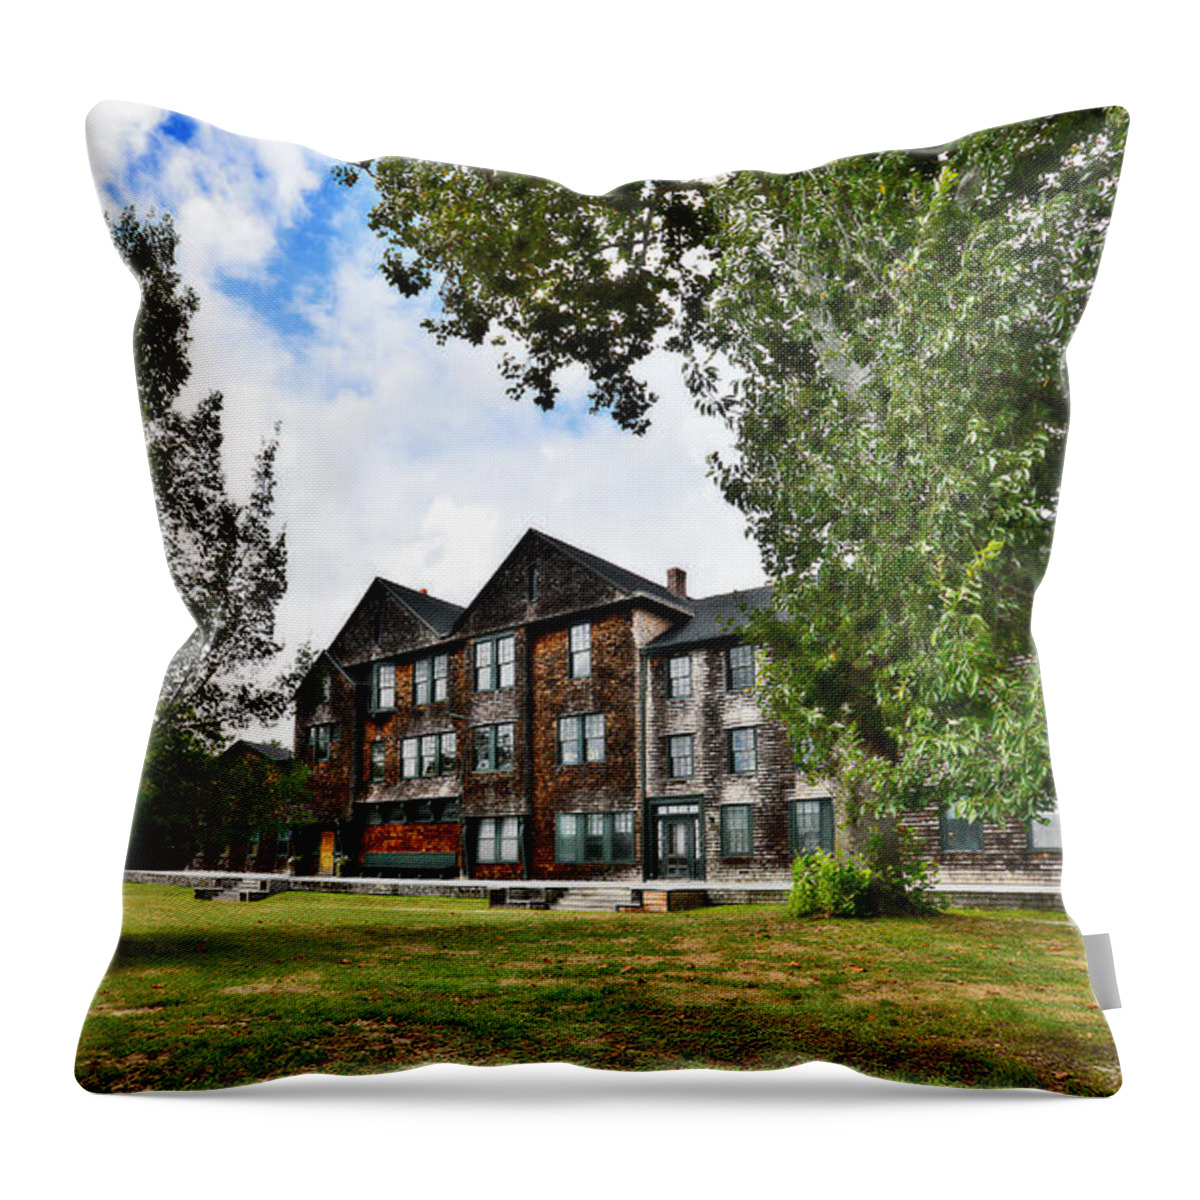 Hunting Lodge Throw Pillow featuring the photograph The Old Hunting Lodge by Stacie Siemsen